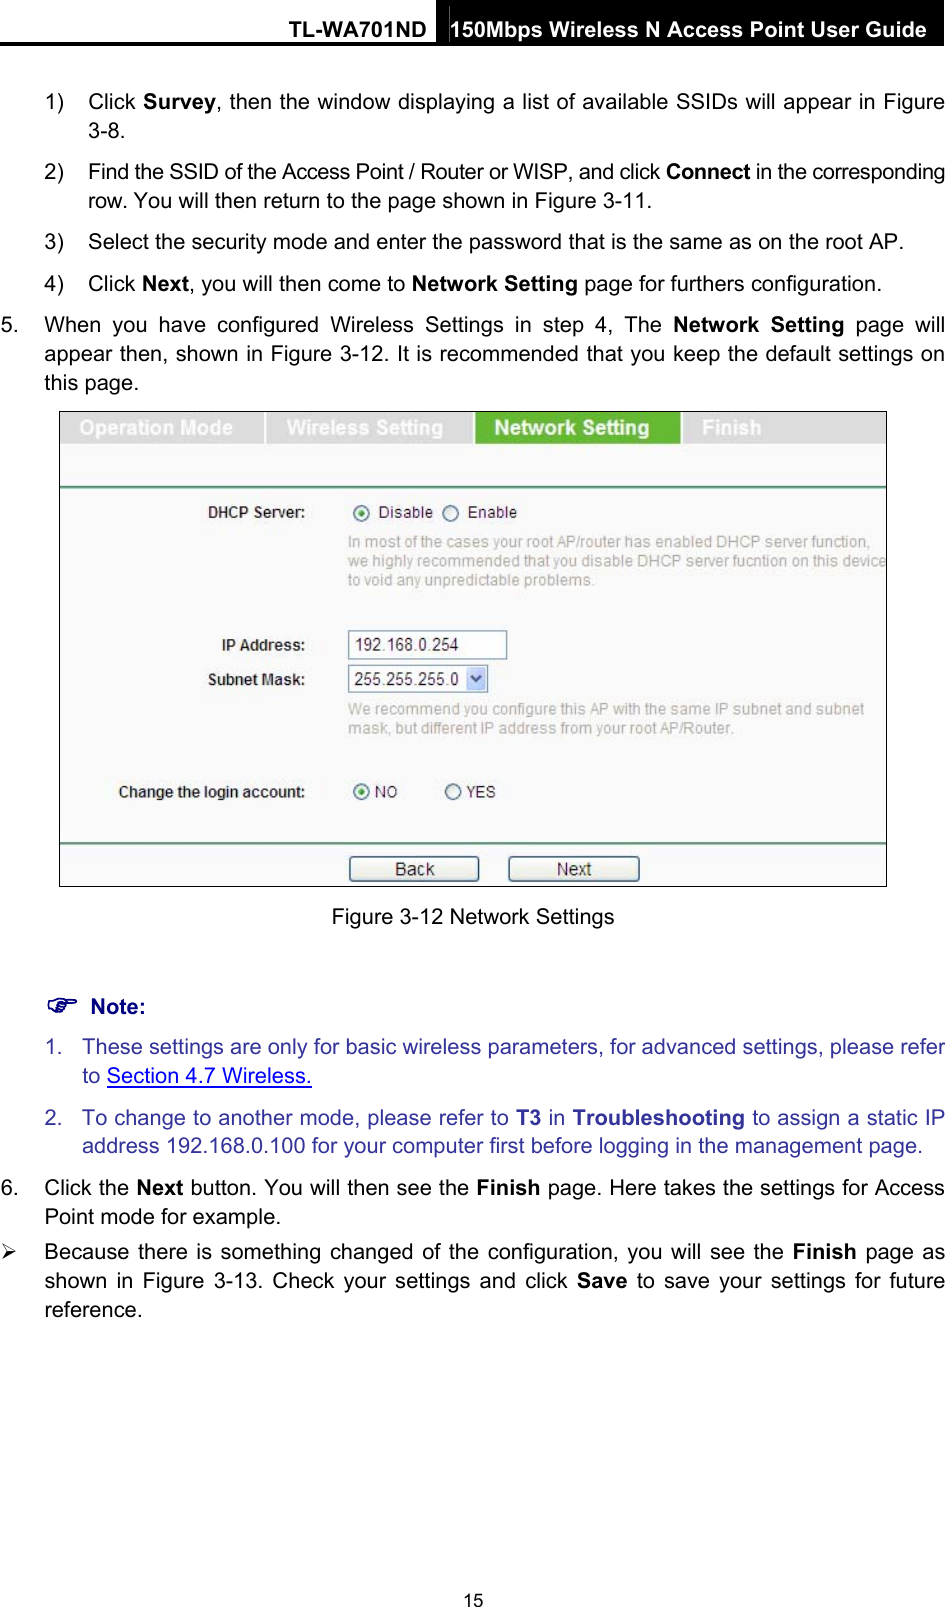 TL-WA701ND 150Mbps Wireless N Access Point User Guide 1) Click Survey, then the window displaying a list of available SSIDs will appear in Figure 3-8. 2)  Find the SSID of the Access Point / Router or WISP, and click Connect in the corresponding row. You will then return to the page shown in Figure 3-11. 3)  Select the security mode and enter the password that is the same as on the root AP. 4) Click Next, you will then come to Network Setting page for furthers configuration. 5.  When you have configured Wireless Settings in step 4, The Network Setting page will appear then, shown in Figure 3-12. It is recommended that you keep the default settings on this page.  Figure 3-12 Network Settings  ) Note: 1.  These settings are only for basic wireless parameters, for advanced settings, please refer to Section 4.7 Wireless. 2.  To change to another mode, please refer to T3 in Troubleshooting to assign a static IP address 192.168.0.100 for your computer first before logging in the management page. 6. Click the Next button. You will then see the Finish page. Here takes the settings for Access Point mode for example. ¾  Because there is something changed of the configuration, you will see the Finish page as shown in Figure 3-13. Check your settings and click Save to save your settings for future reference.  15 